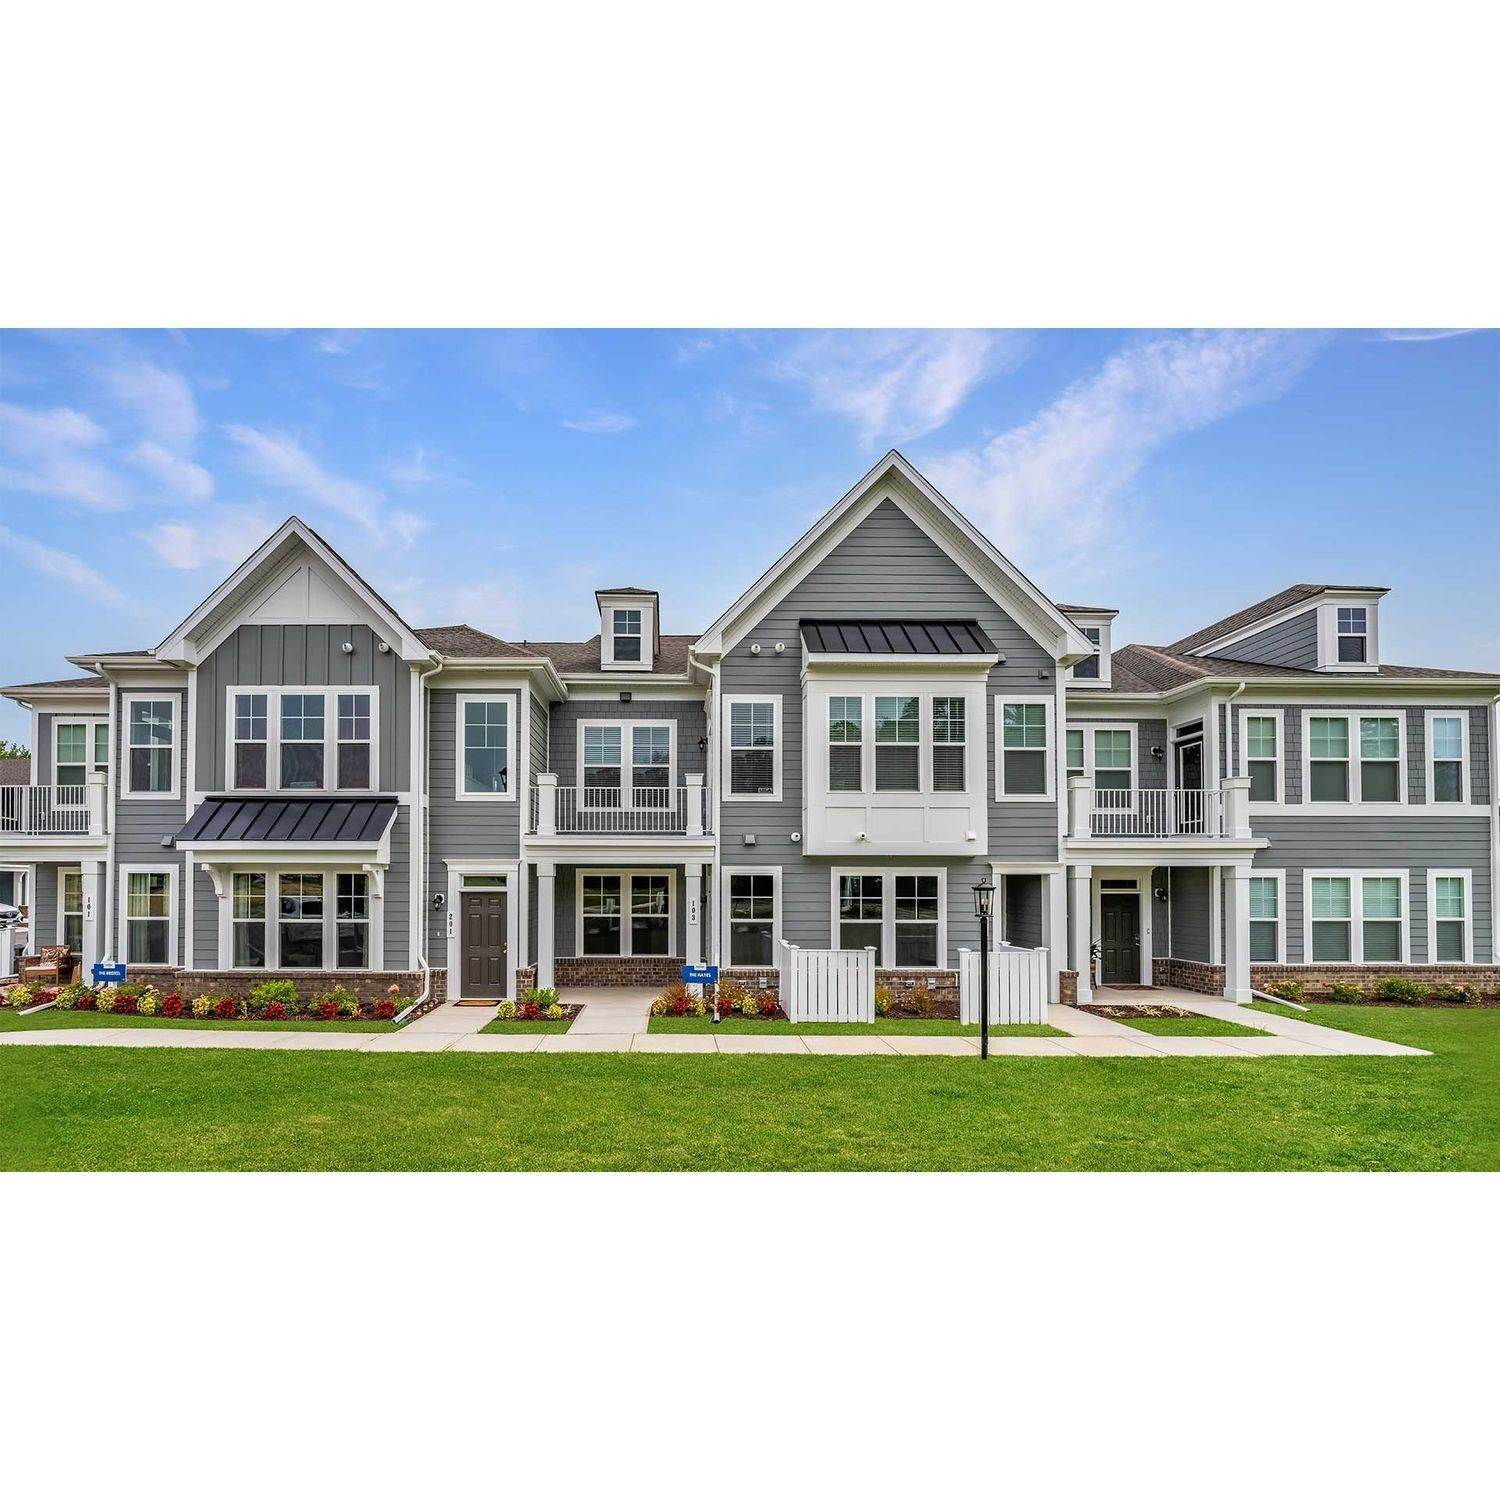 4. The Pointe at Twin Hickory здание в 4605 Pouncey Tract Road, Glen Allen, VA 23059